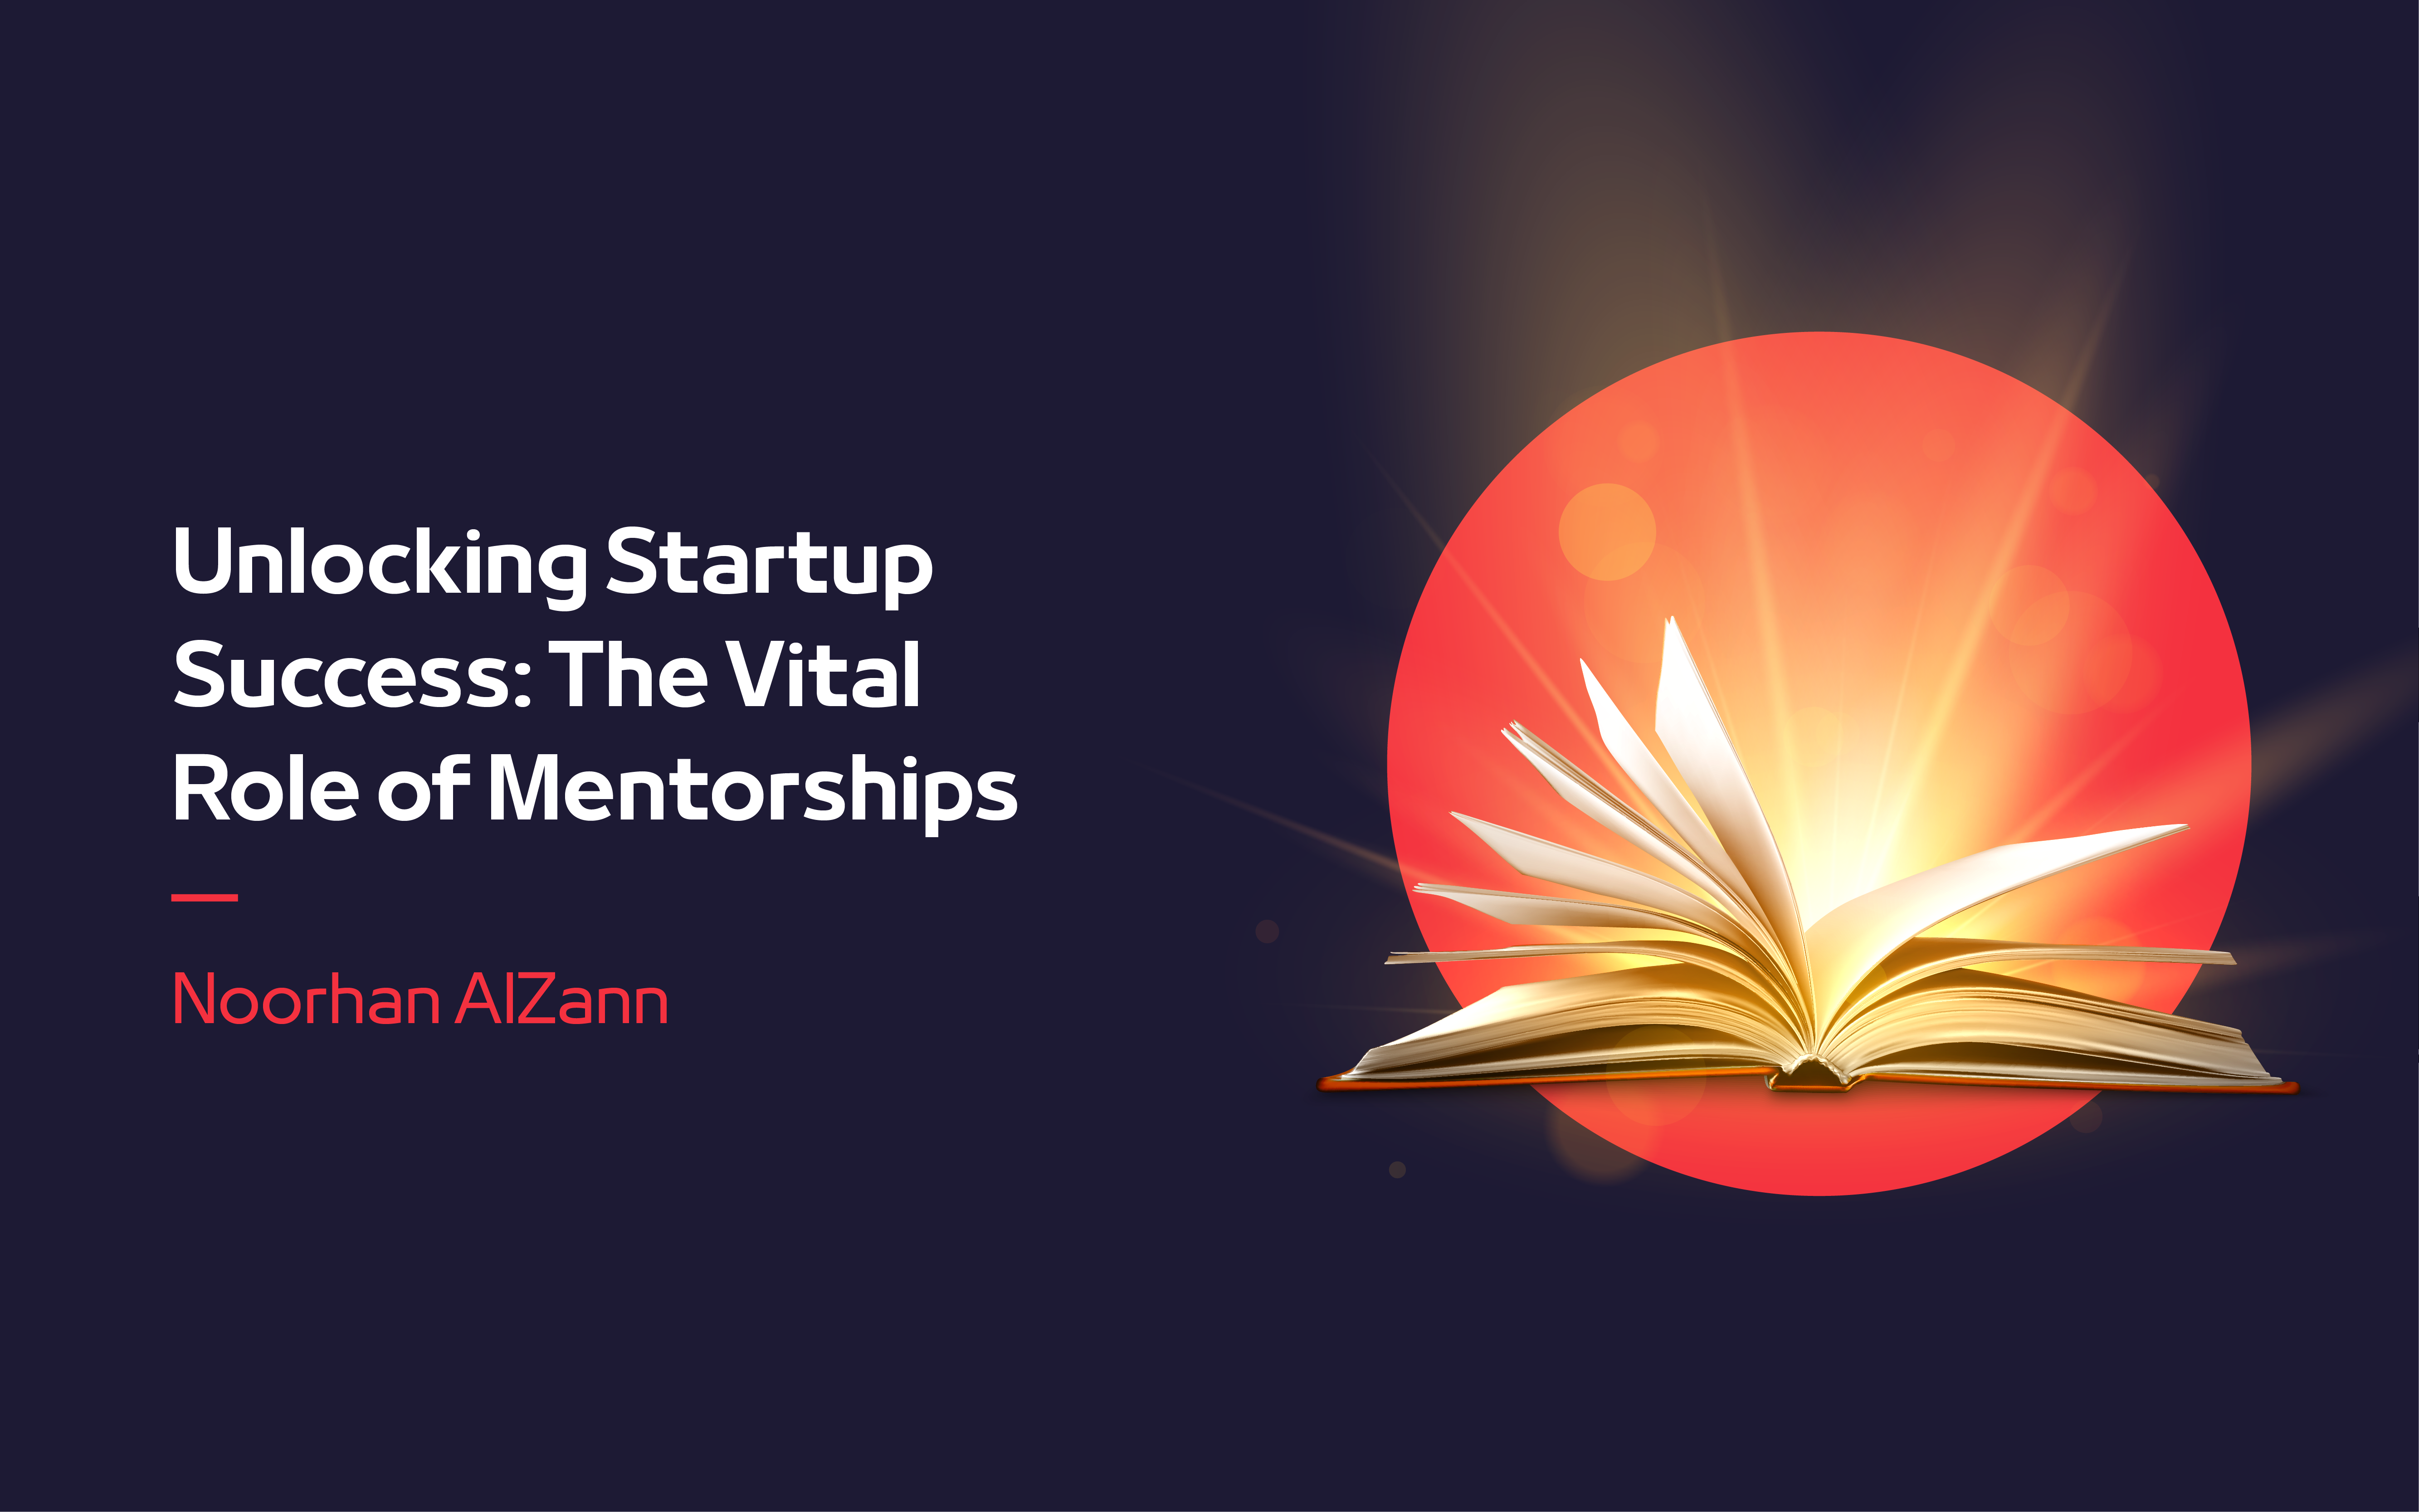 Unlocking Startup Success: The Vital Role of Mentorships